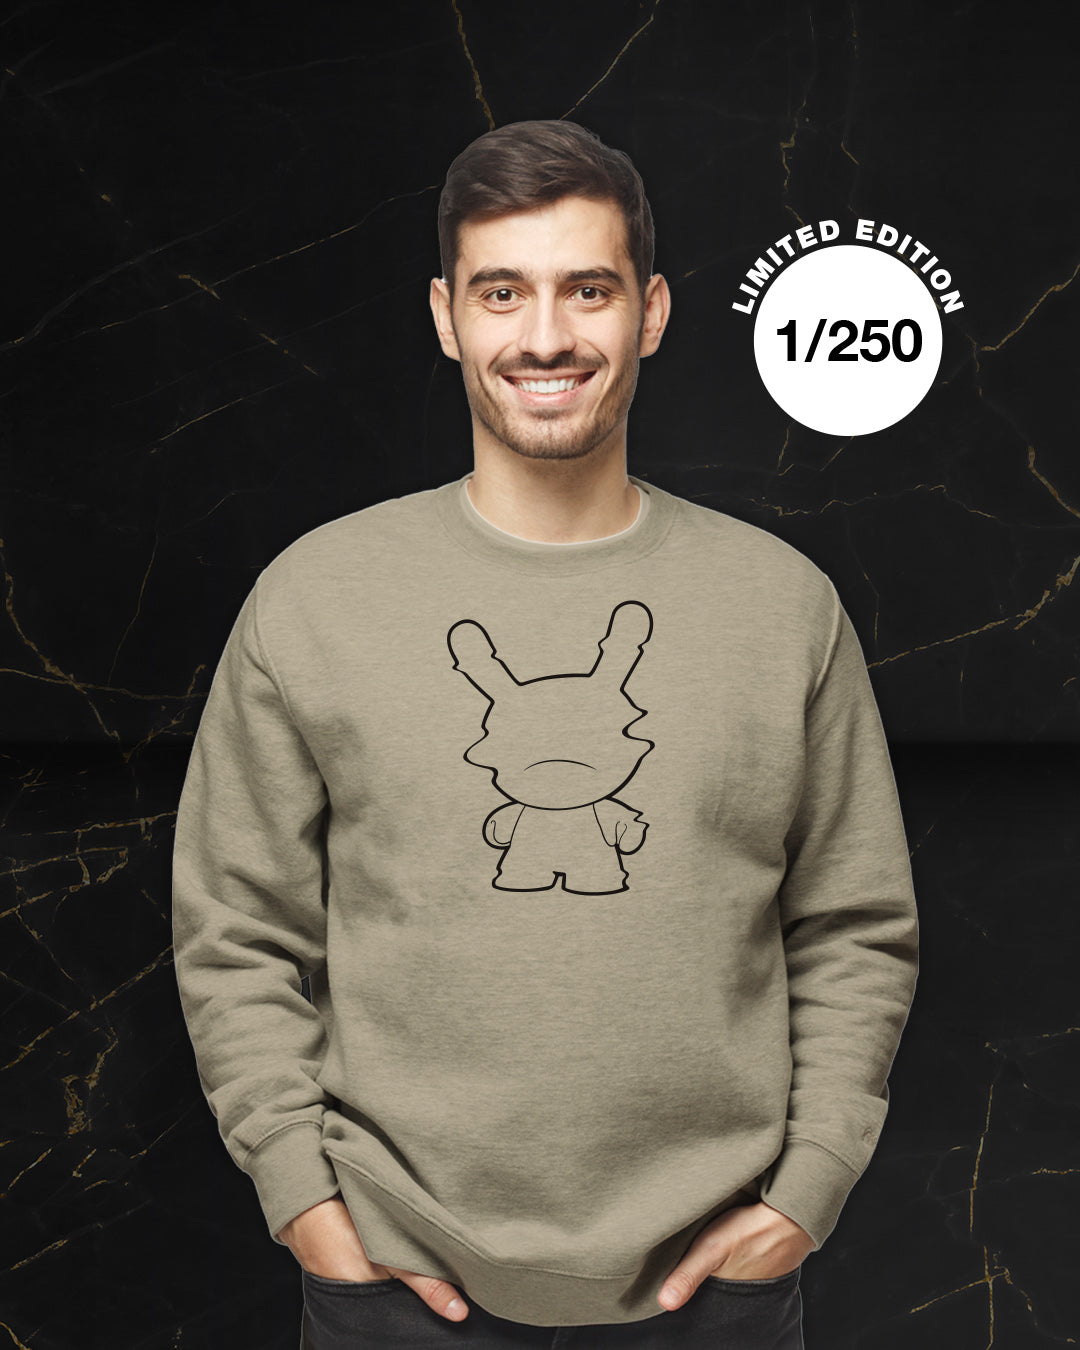 BLACK FRIDAY! Dunny Glitch Unisex Oversized Pullover Sweatshirt (Limited Edition of 250) (PRE-ORDER) - Kidrobot